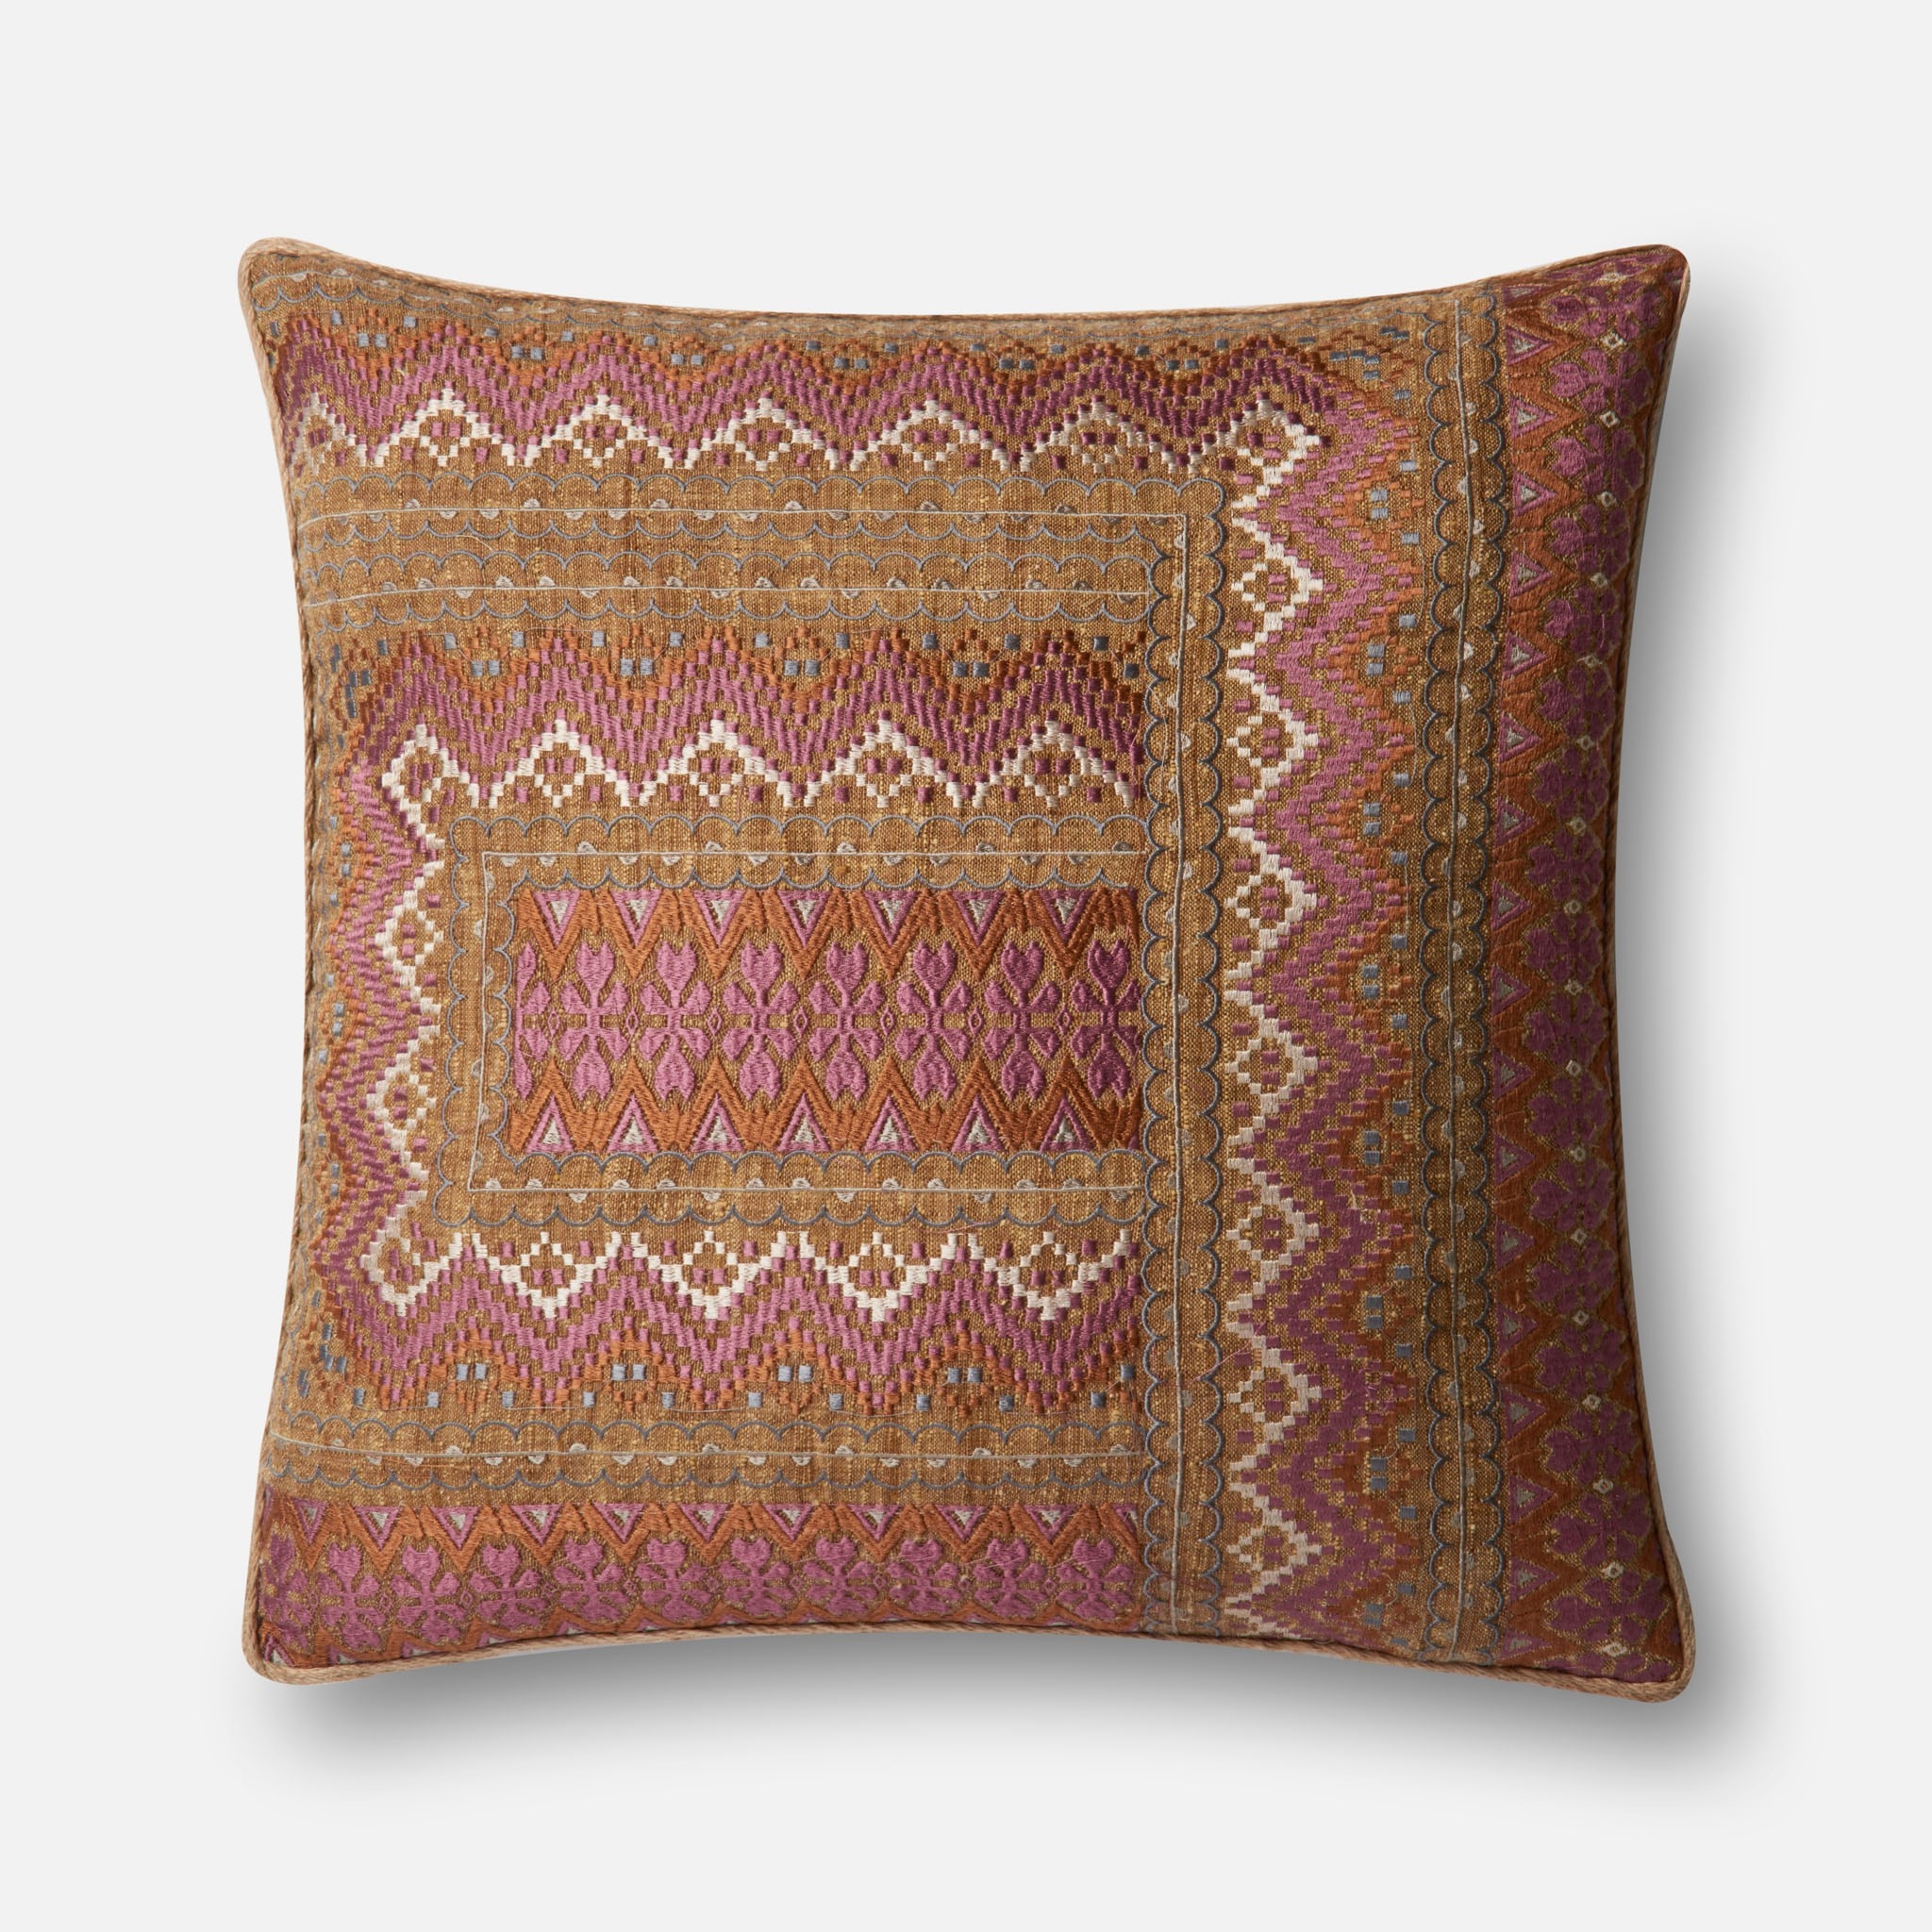 DSET Pillow PINK / RUST 22" X 22" Cover w/Down - Image 0